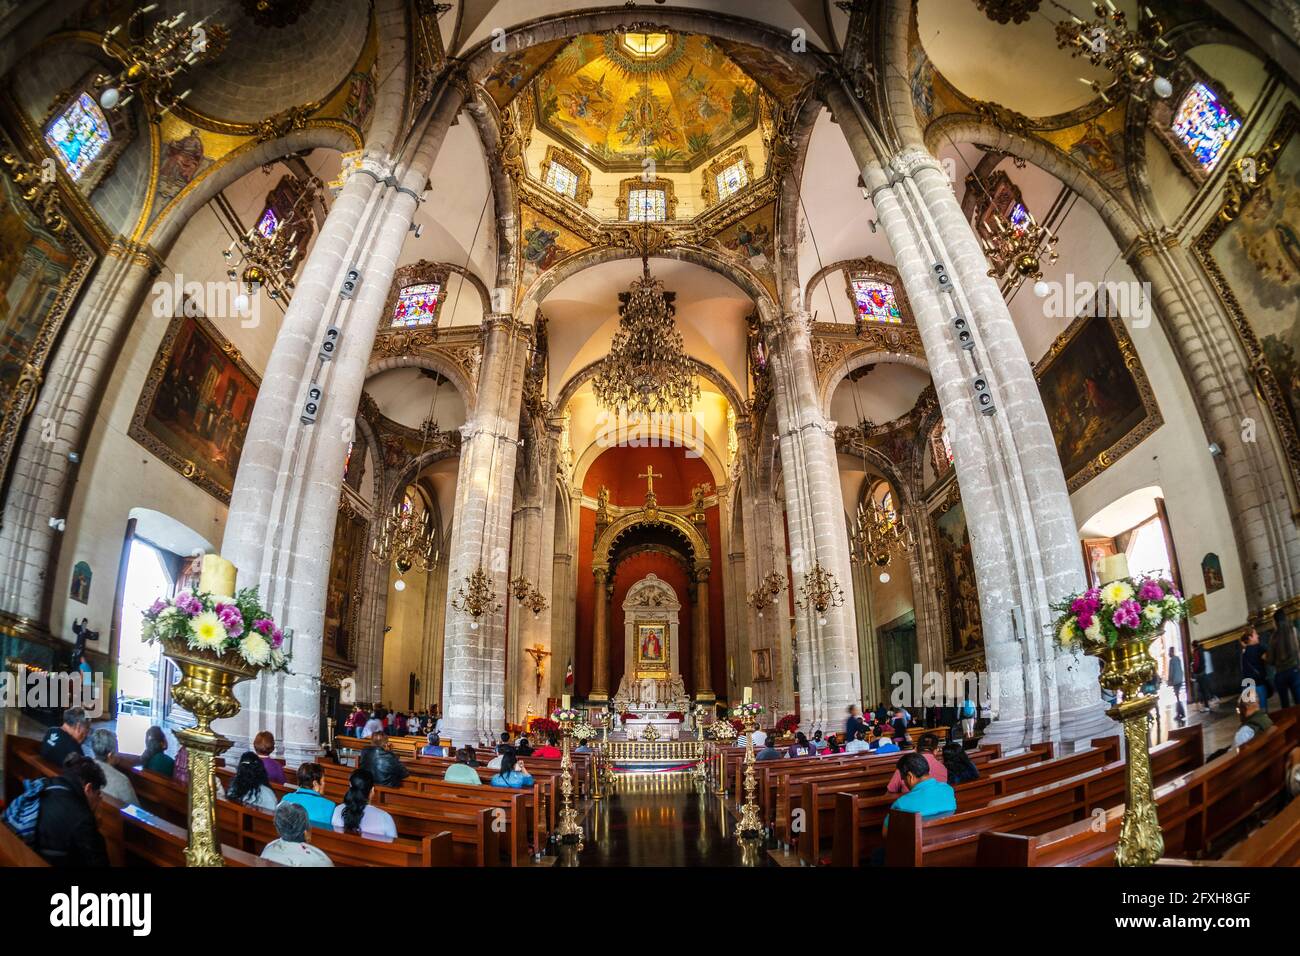 Interior of historical landmark Basilica of Our Lady of Guadalupe in Mexico City, Mexico. Stock Photo